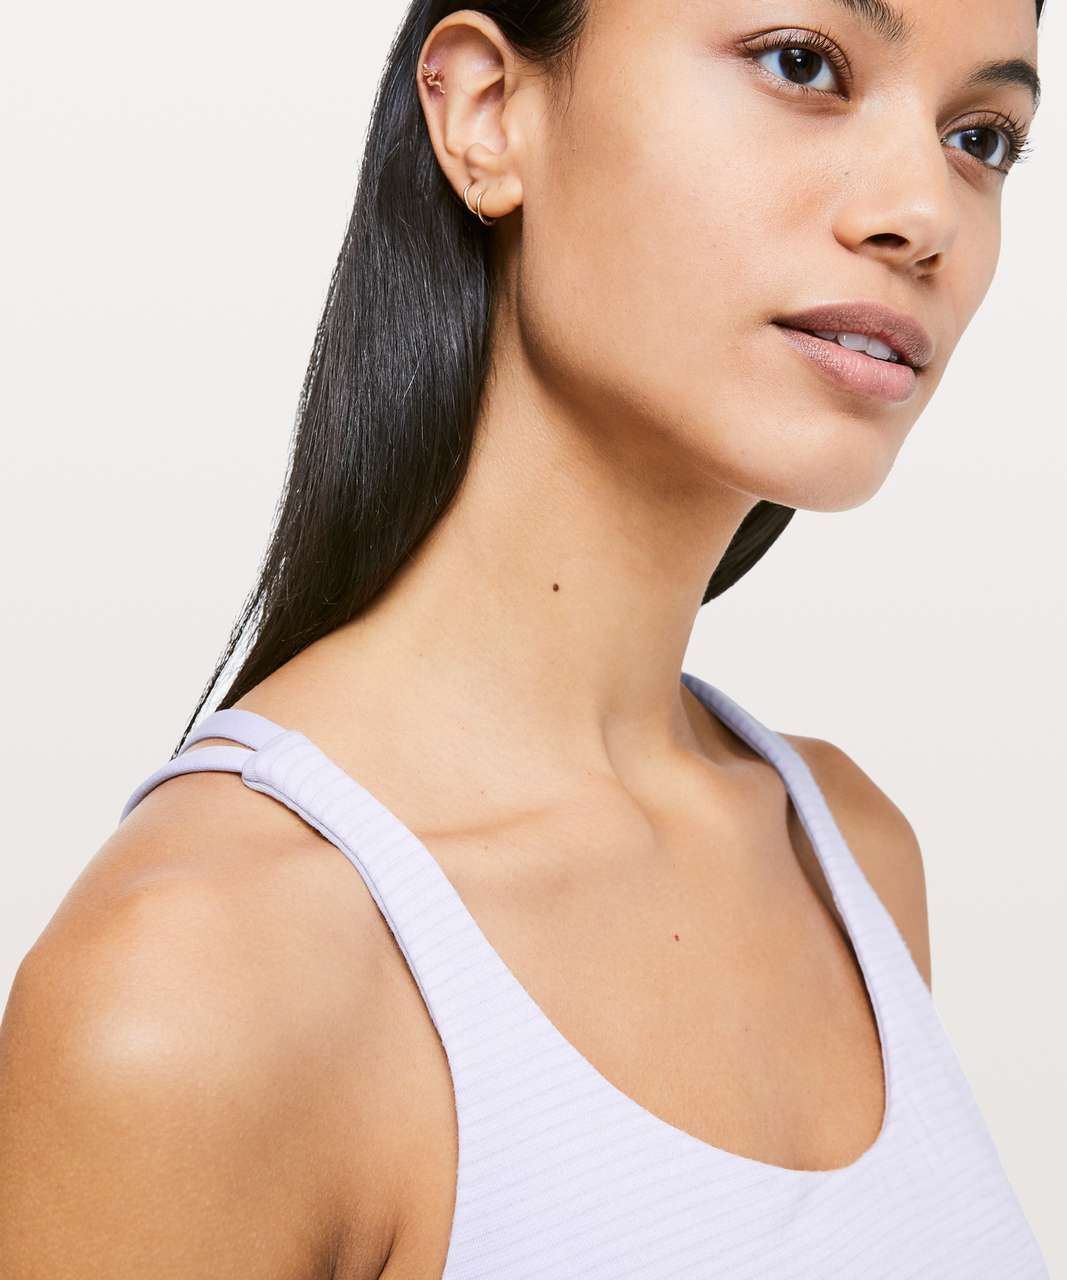 Lululemon Moment To Movement 2-In-1 Tank - Heathered Sheer Lilac / Sheer Lilac